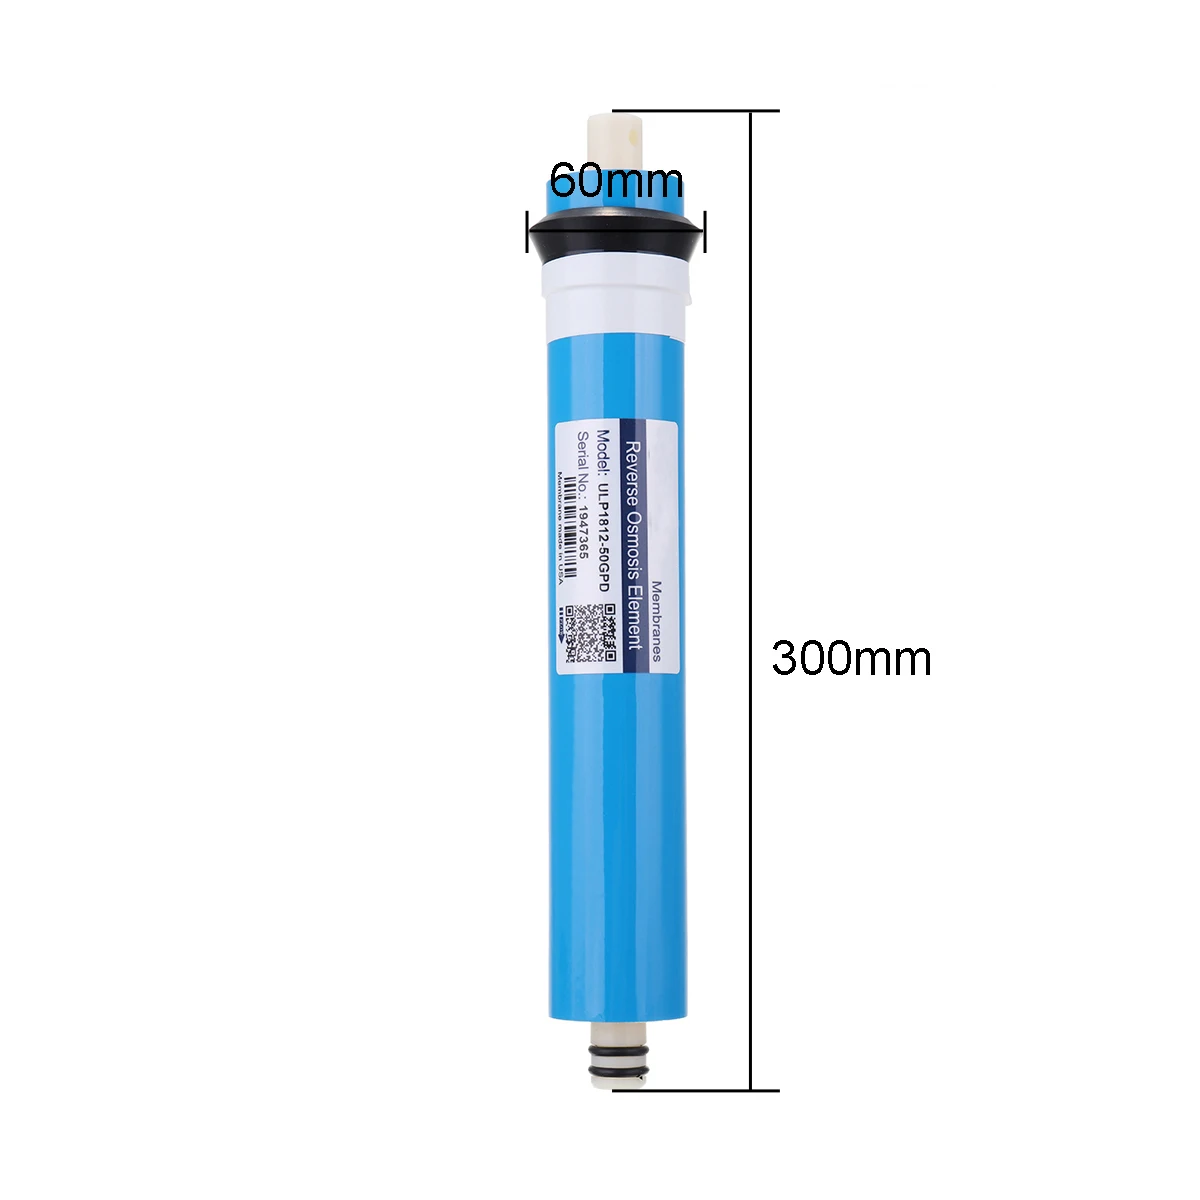 Home 100 GPD RO Membrane Reverse Osmosis Replacement Water System Filter Purification Water Filtration Reduce Bacteria Kitchen